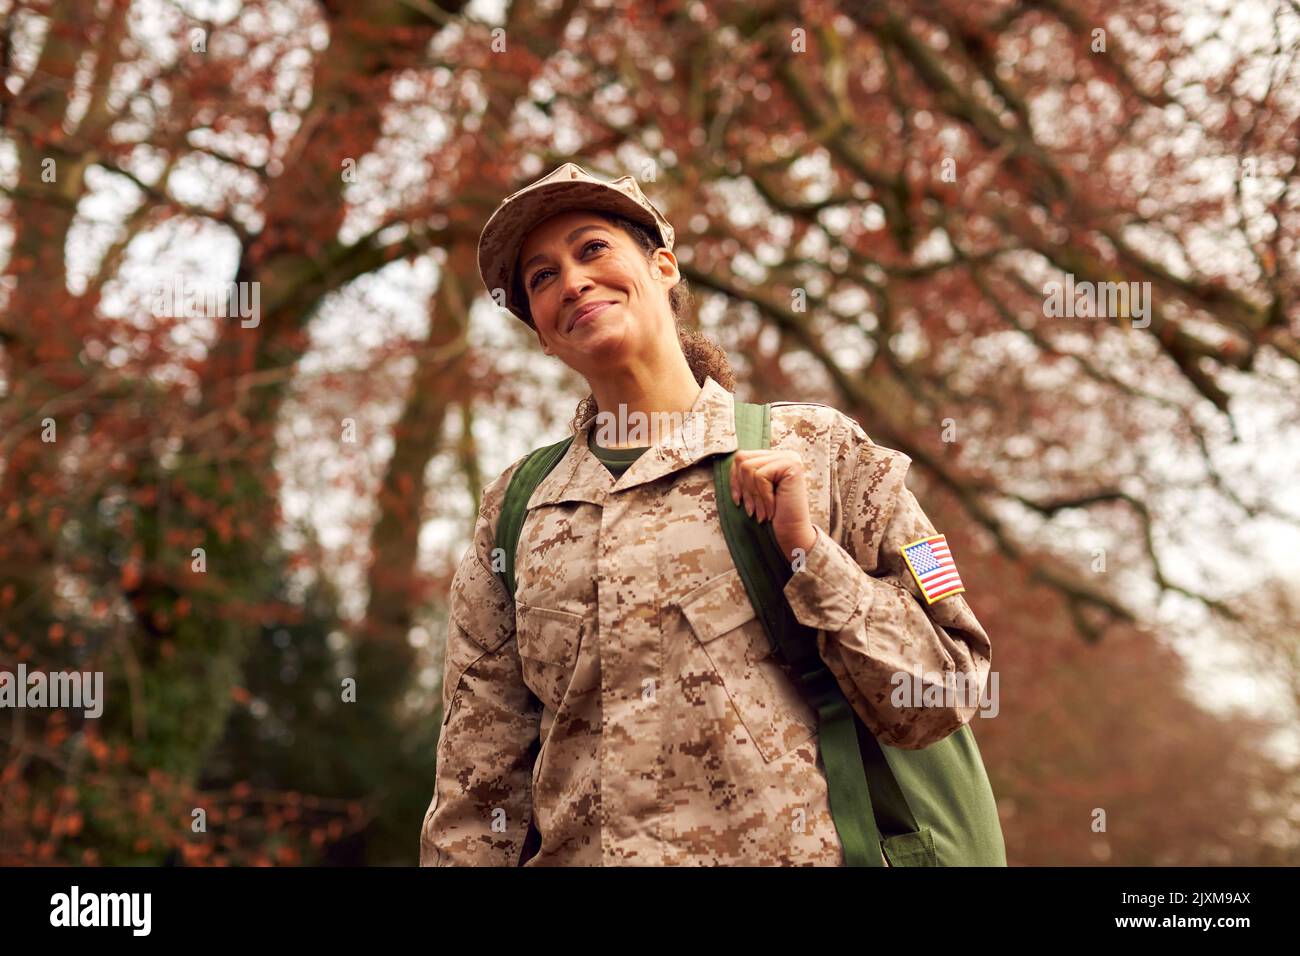 American Female Soldier In Uniform Carrying Kitbag Returning Home On Leave Stock Photo